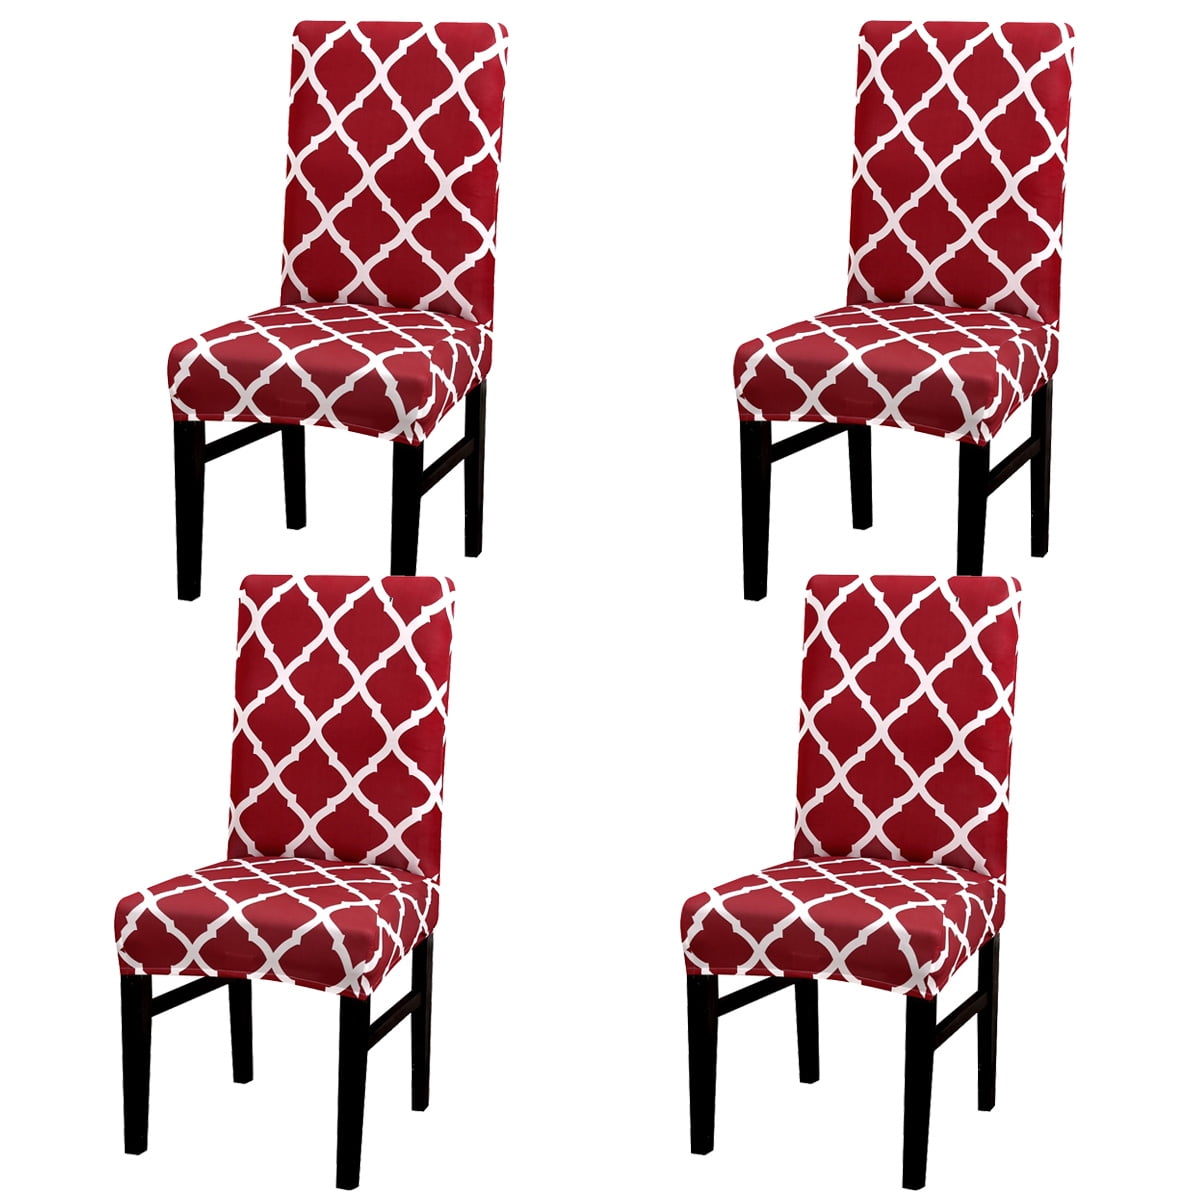 Details about   4PCS Dining Chair Seat Covers Slip Stretch Wedding Banquet Party Removable New 